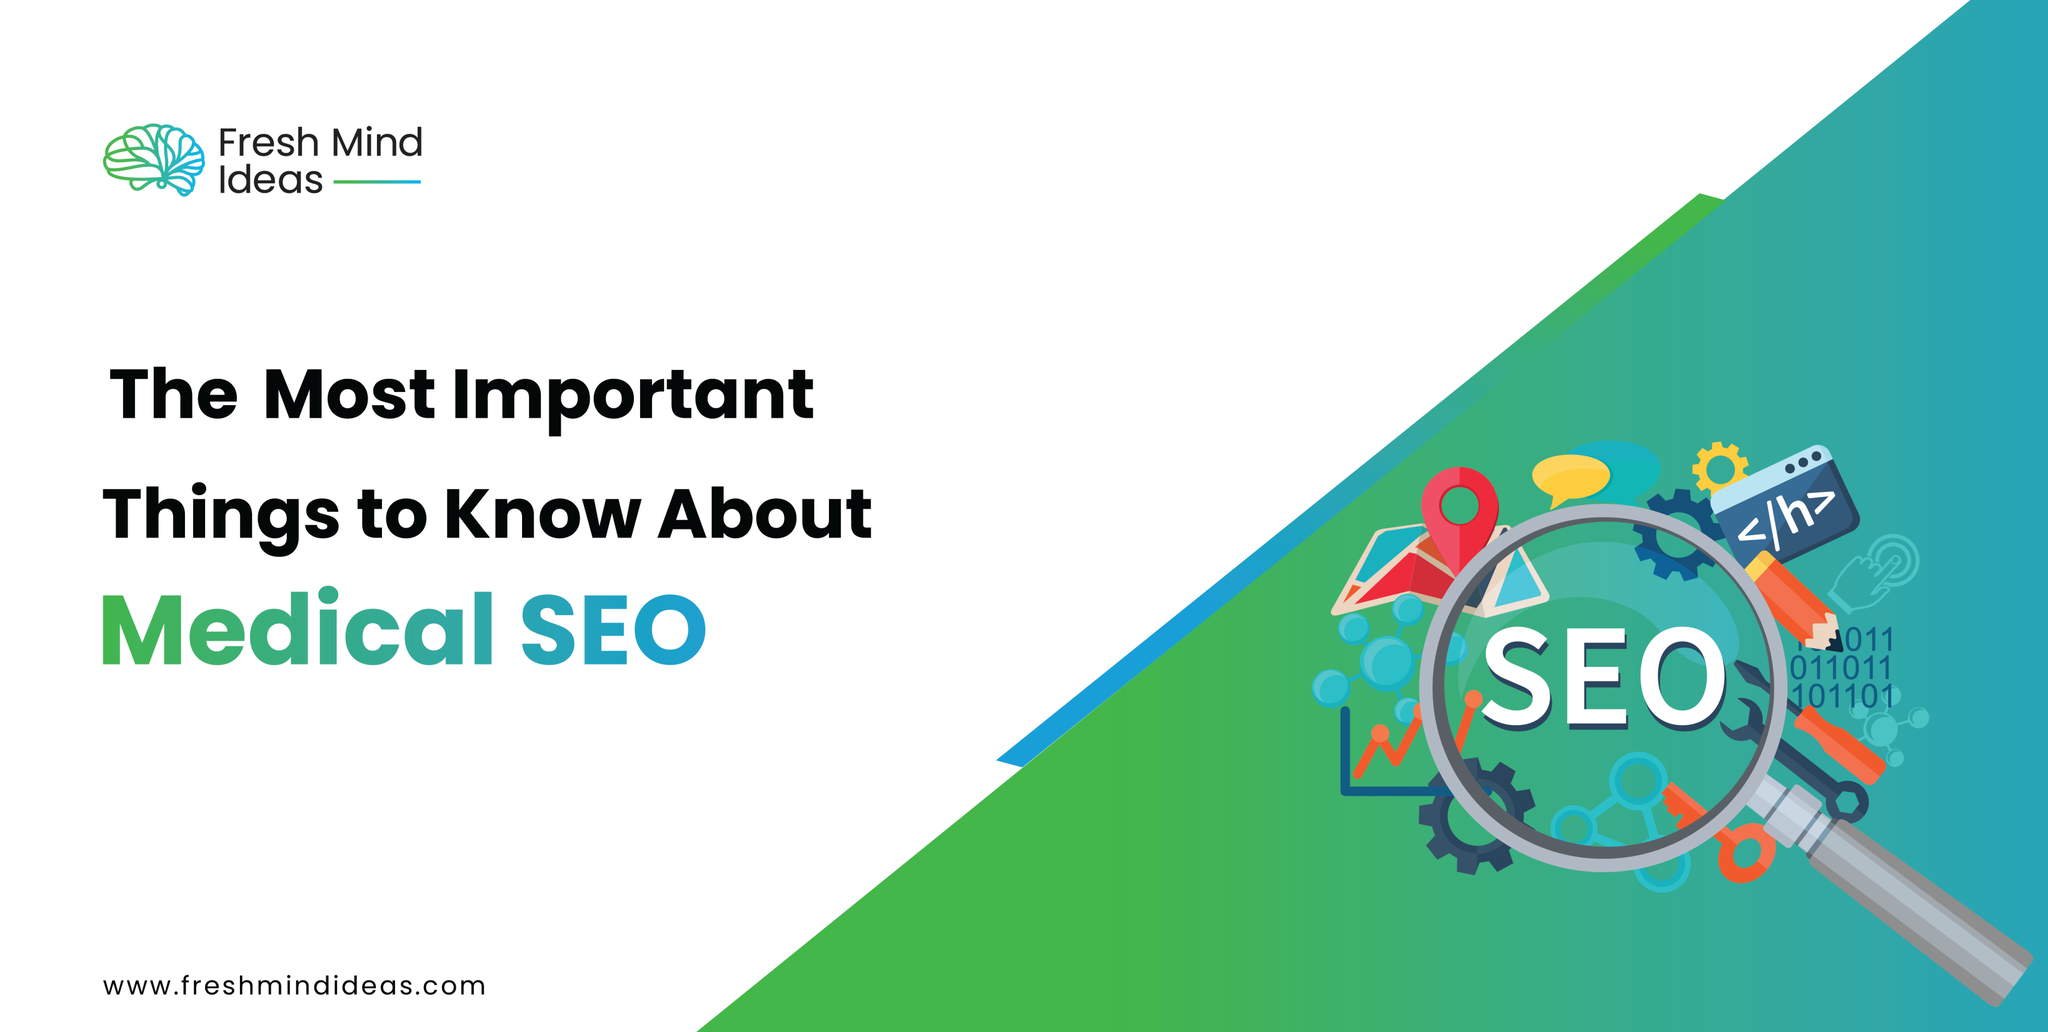 The 5 most important things to know about medical SEO